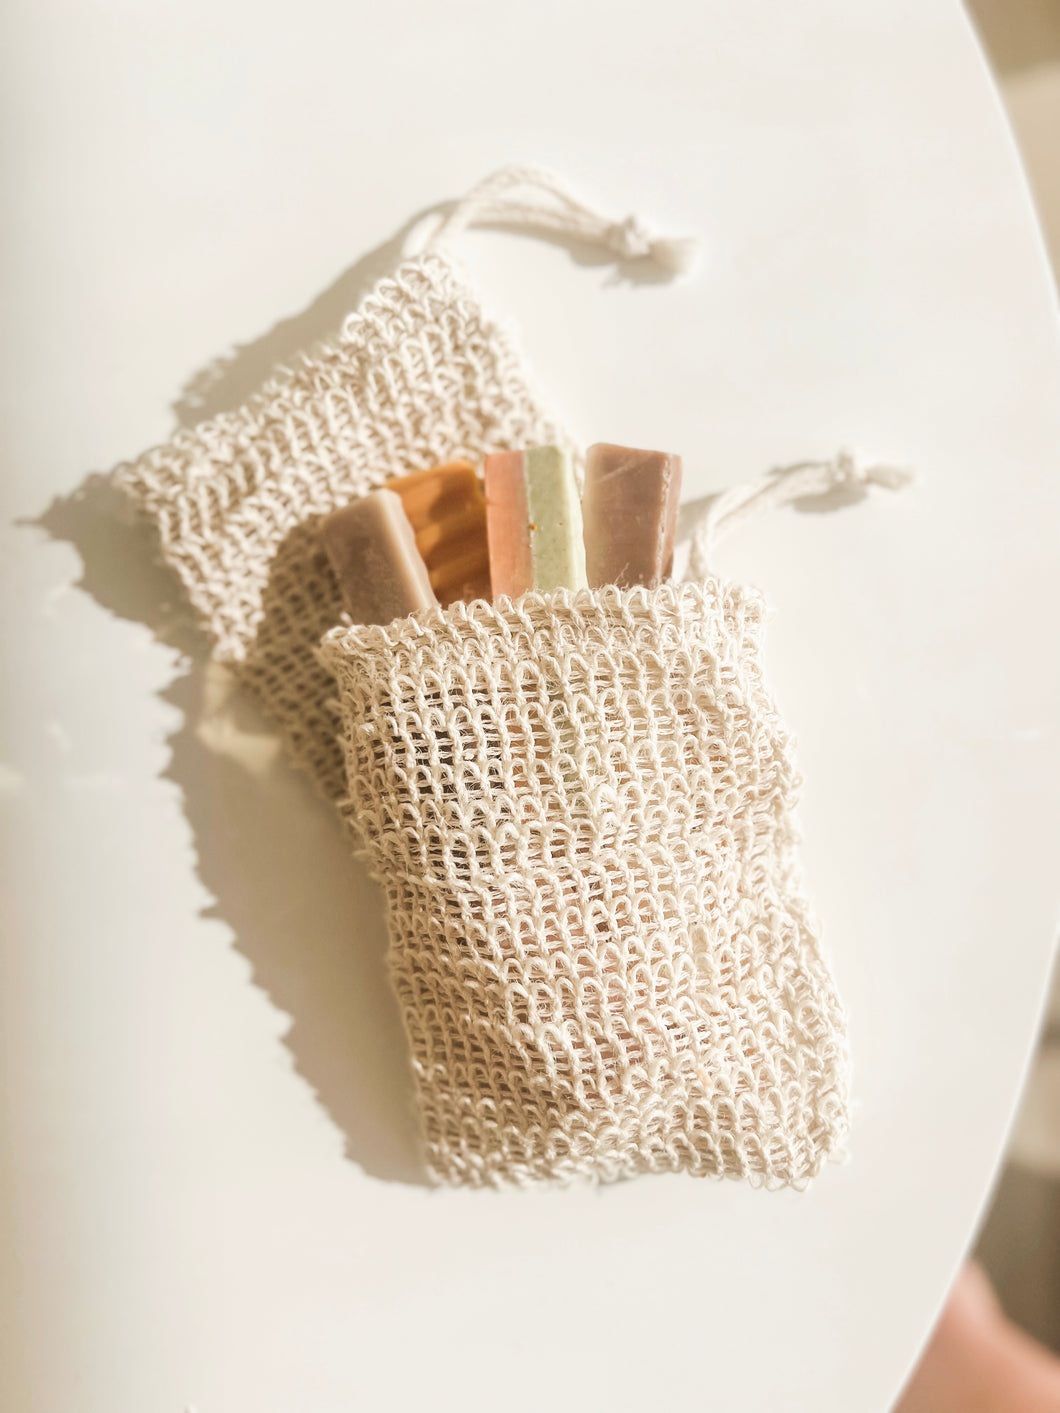 soap scrap grab bag | exfoliating eco-friendly soap saver bags filled with sample soaps